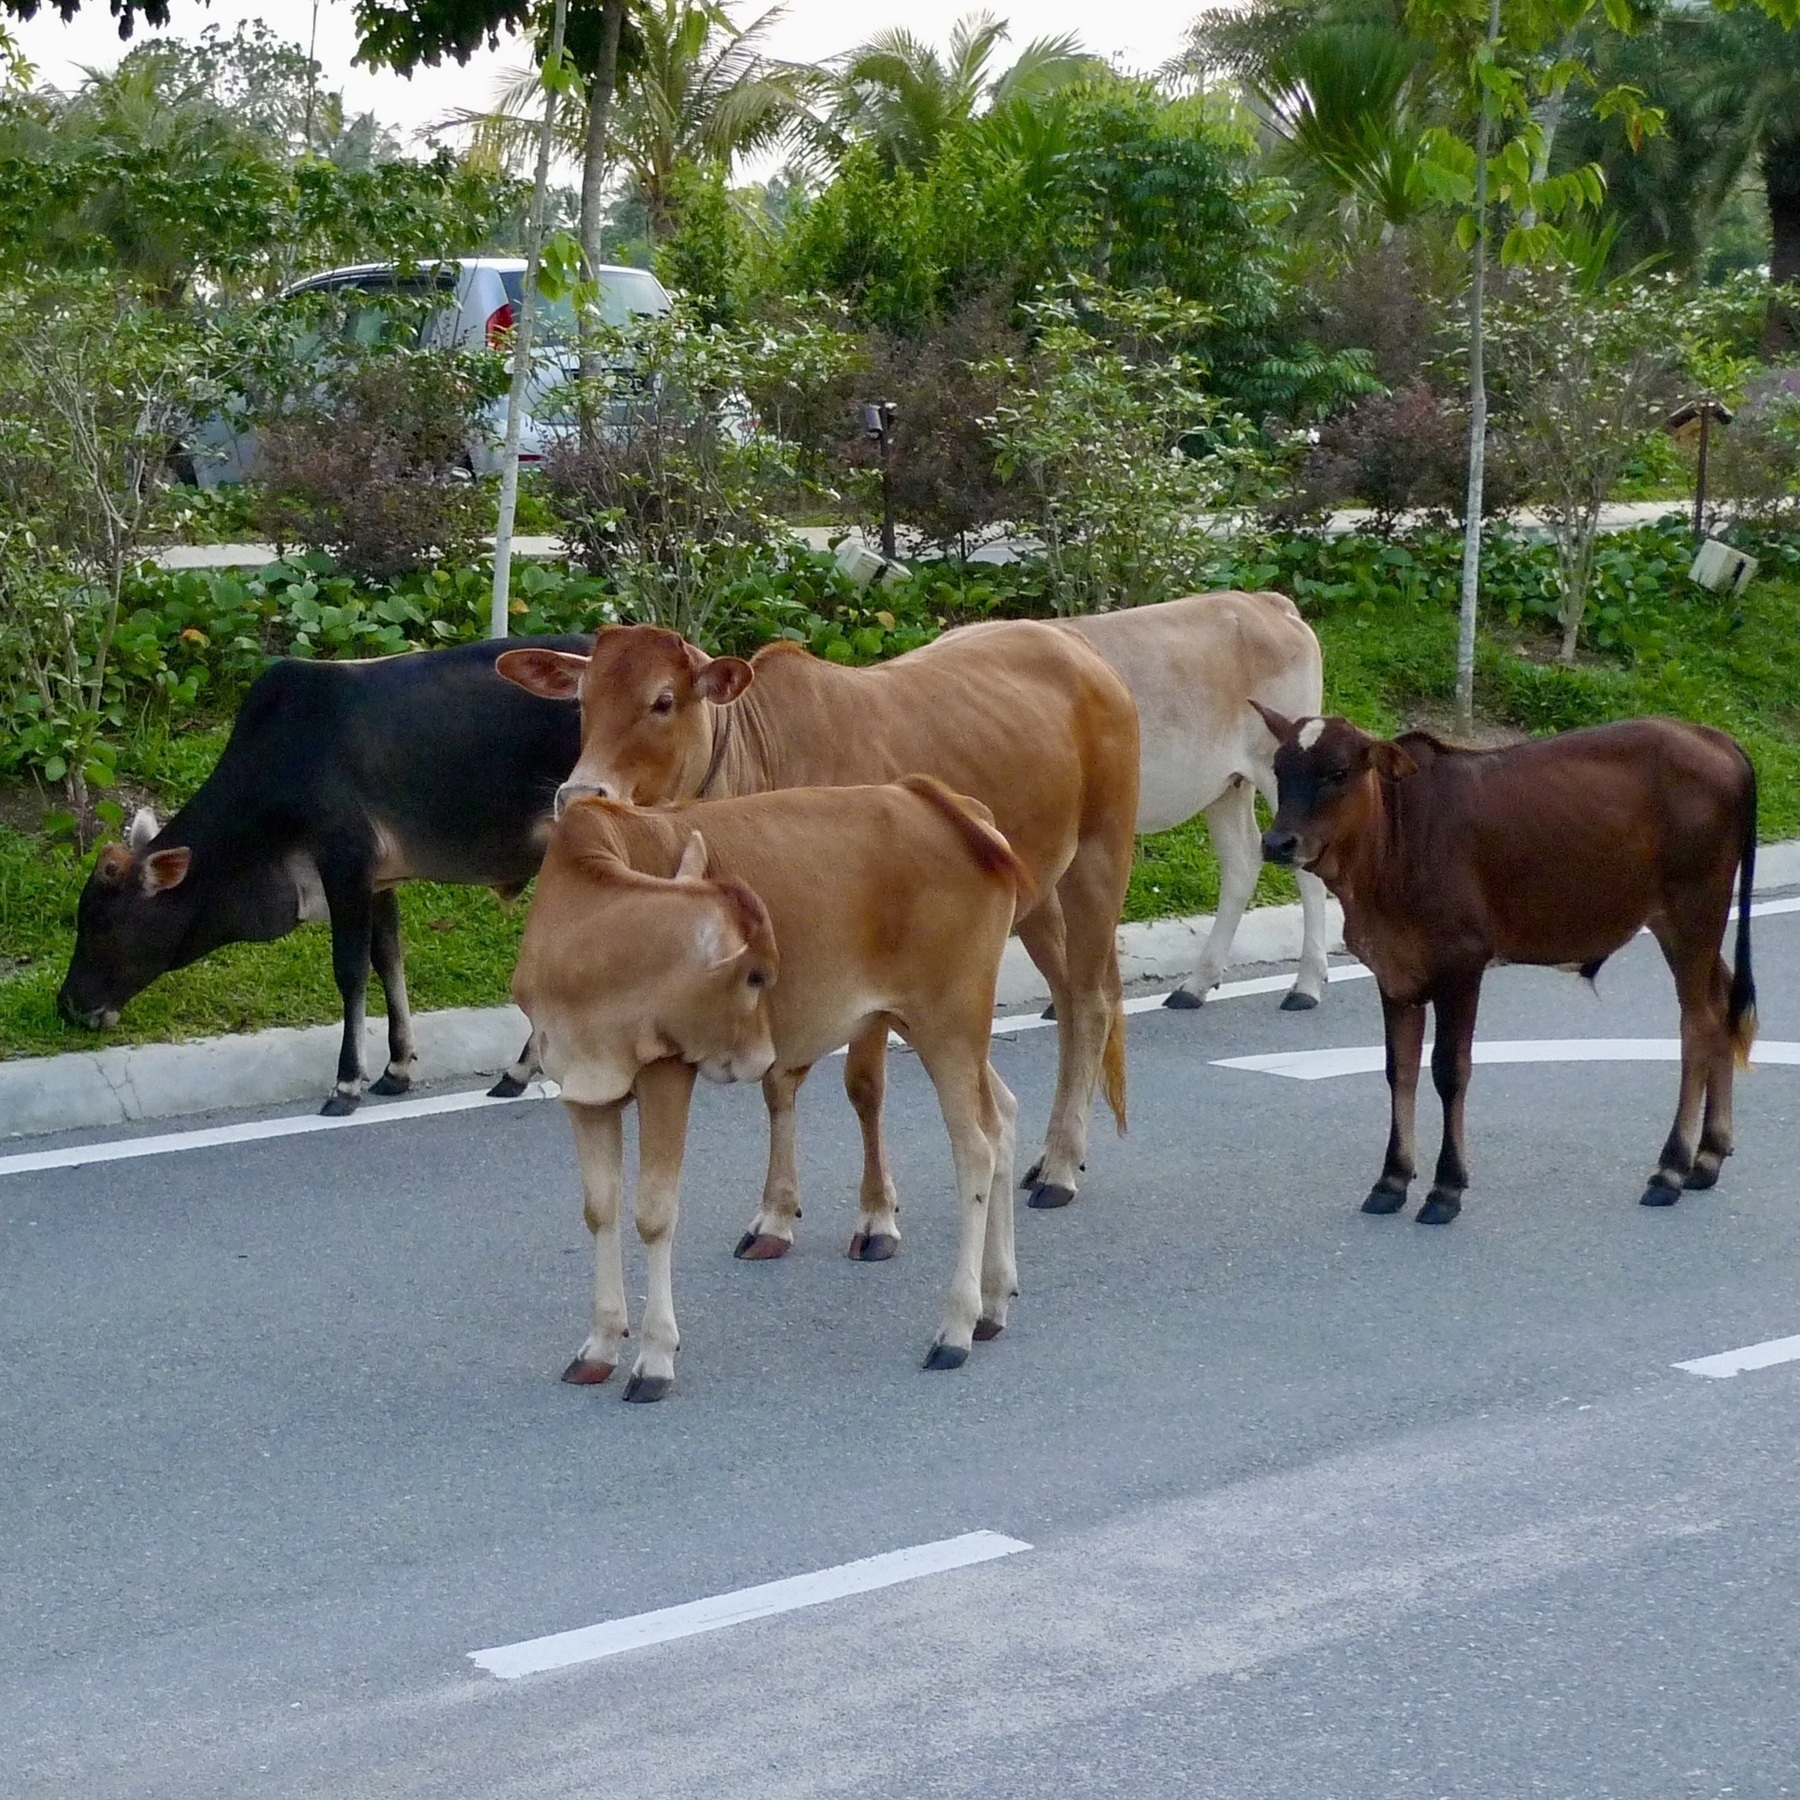 A group of friendly cows blocking the road